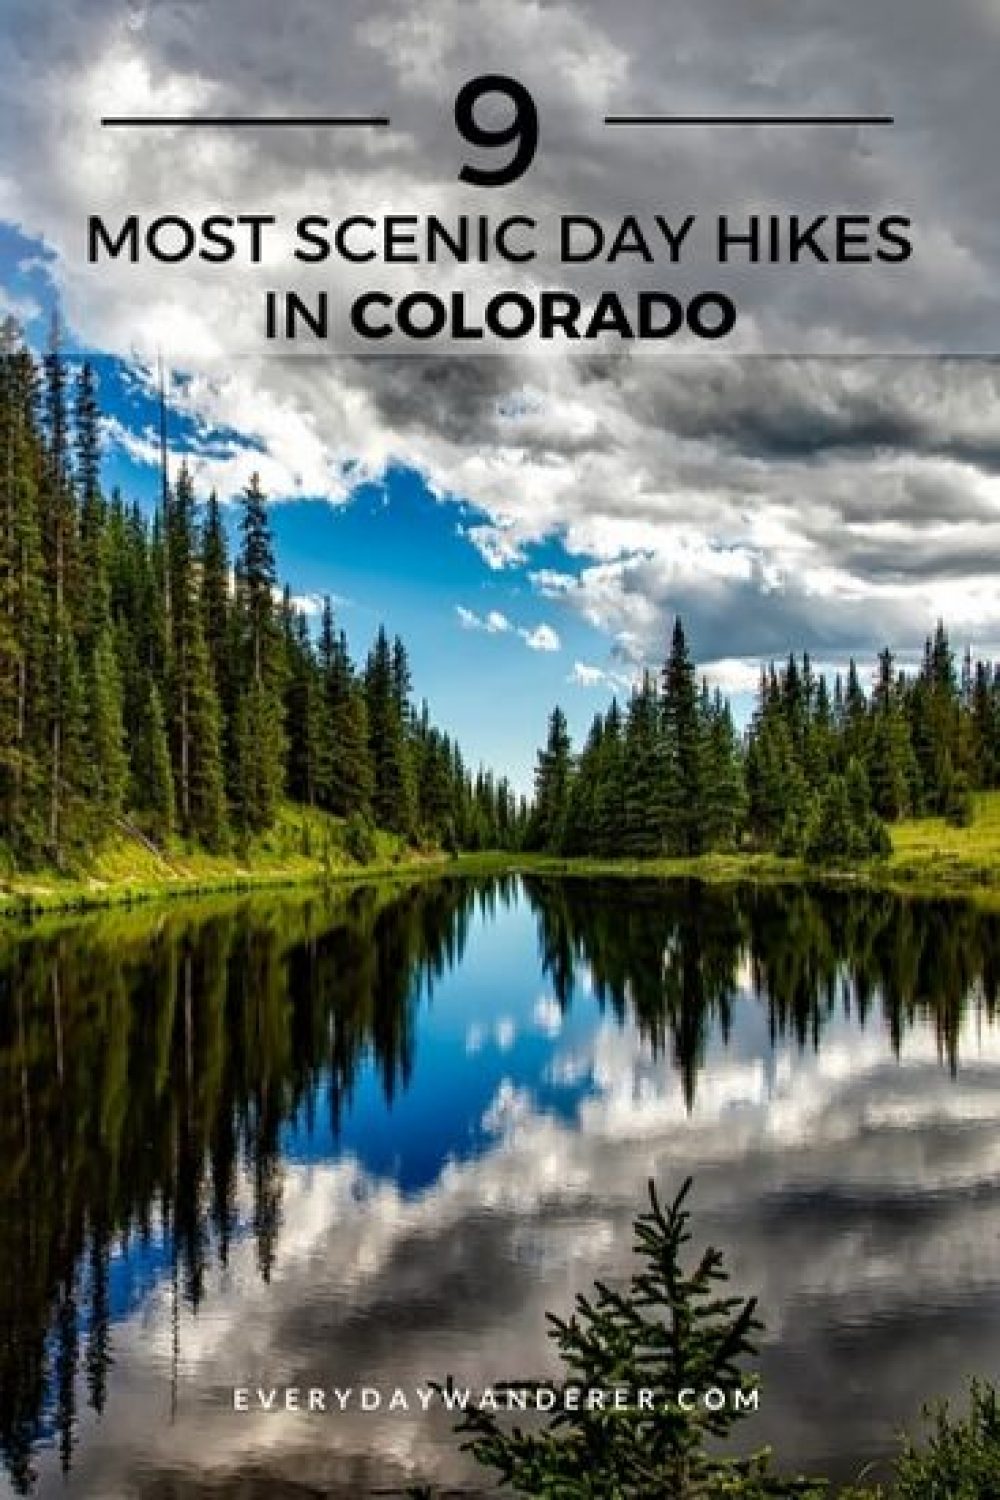 Best day hikes in Colorado and best day hikes near Denver | Day Hike Colorado | Colorado Trip | Colorado Travel | Colorado Vacation | Colorado Trail Thru Hike | Colorado Vacation | Colorado Vacation Summer | Hiking Quotes | Hiking Outfit | Hiking Boots | Hiking Fashion | Day Hike Packing List | Day Hike Essentials | Day Hike Food | Day Hike Outfit | Colorado Road Trip| Colorado Road Trip Summer | Colorado Road Trip Itinerary | #colorado #US #USA #USTravel